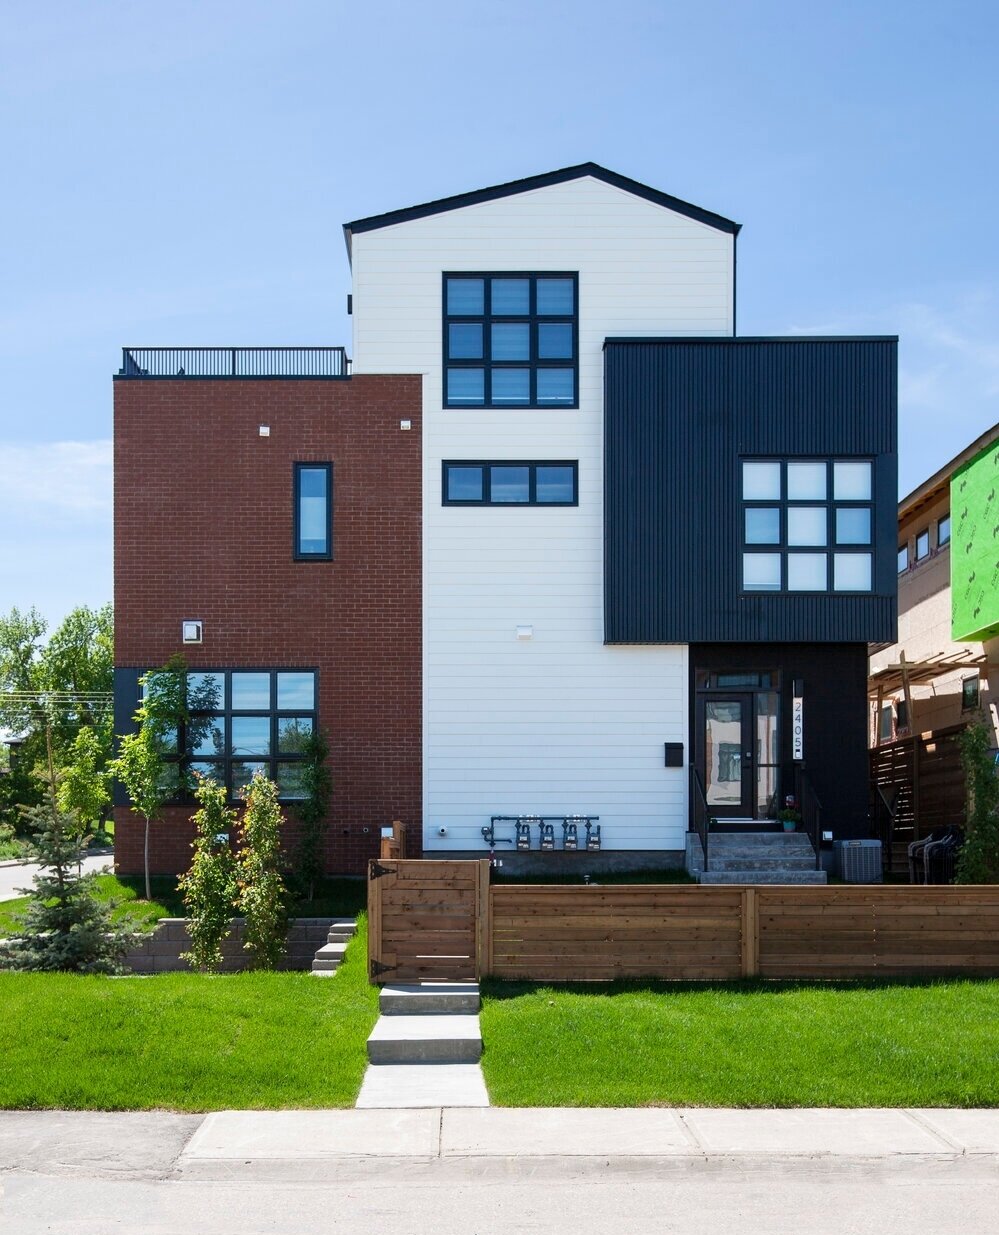 Sometimes our favourite facade isn't the front. Our Richmond 4 project is a four-unit rowhouse building a short walk from Calgary&rsquo;s Marda Loop district. The front facade evokes a turn-of-the-century warehouse, which is great, but this north fac